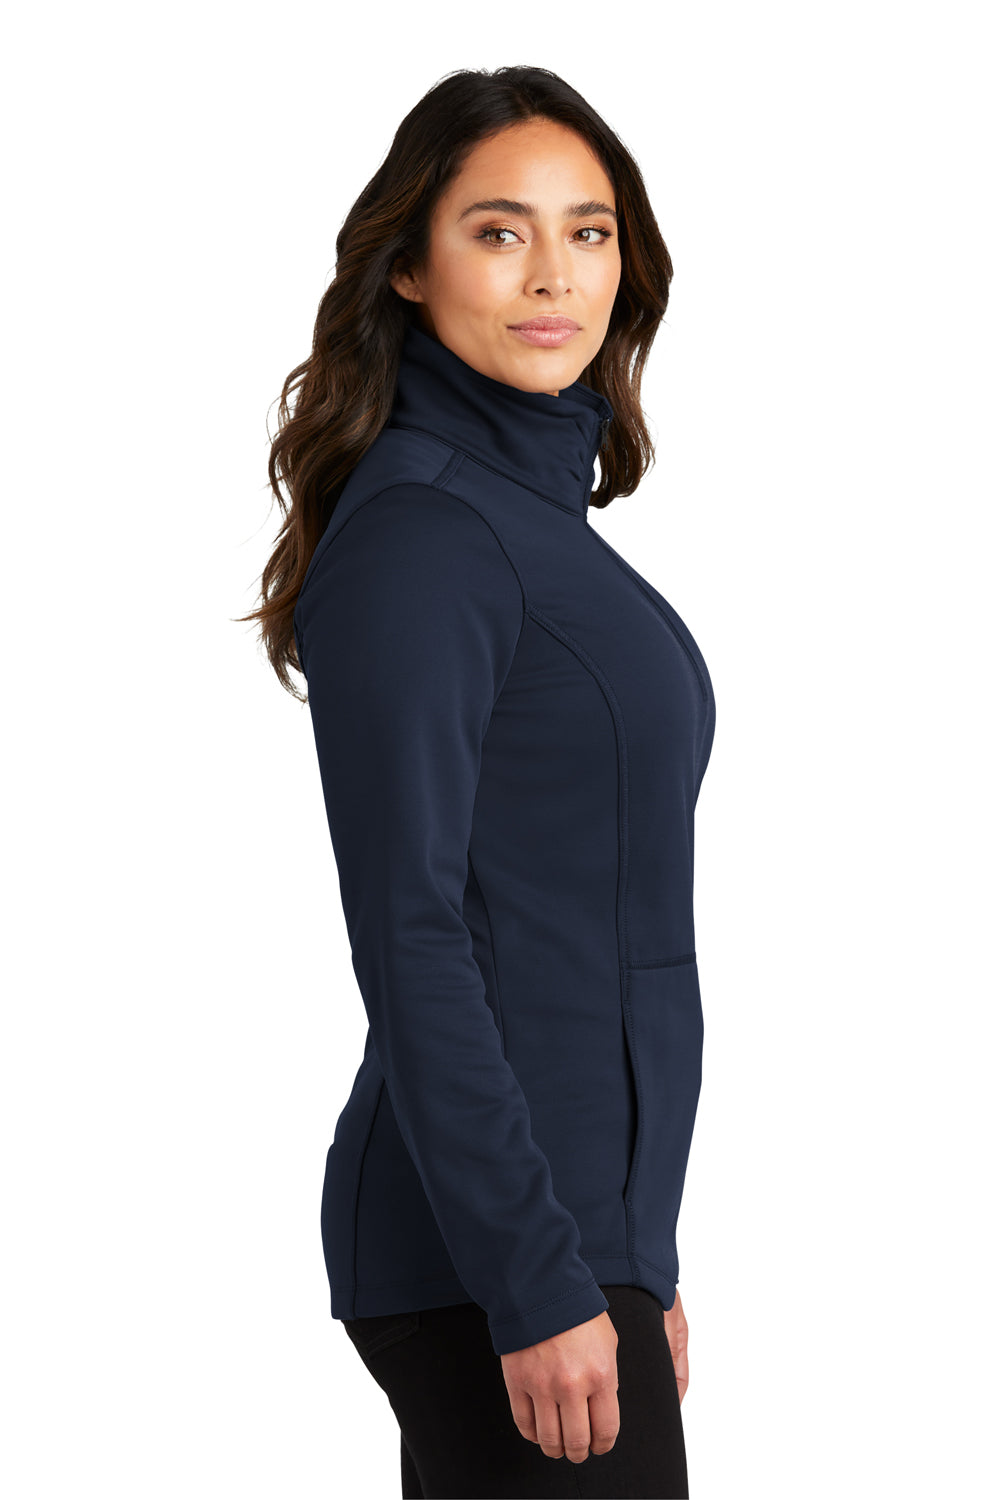 Port Authority L804 Womens Smooth Fleece 1/4 Zip Hooded Jacket River Navy Blue Side